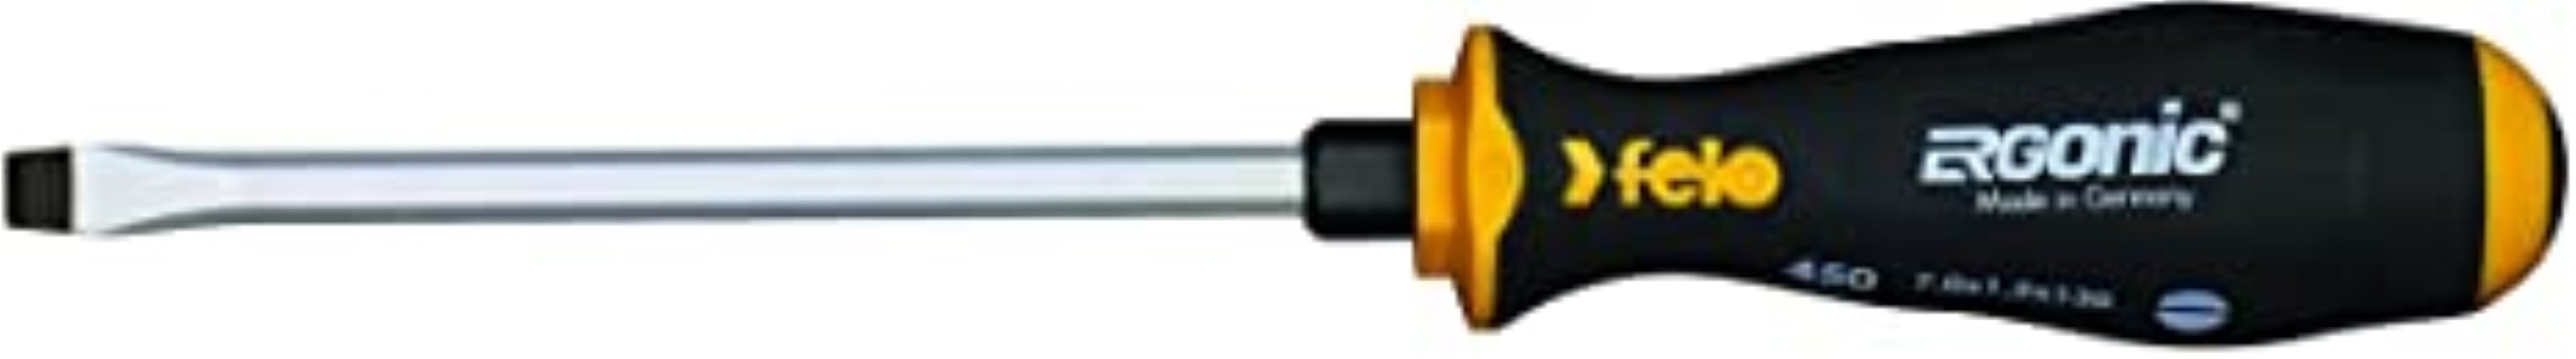 Felo 0715764523 Ergonic 9/32-Inch x 5-Inch Slotted Screwdriver with Hammer Cap